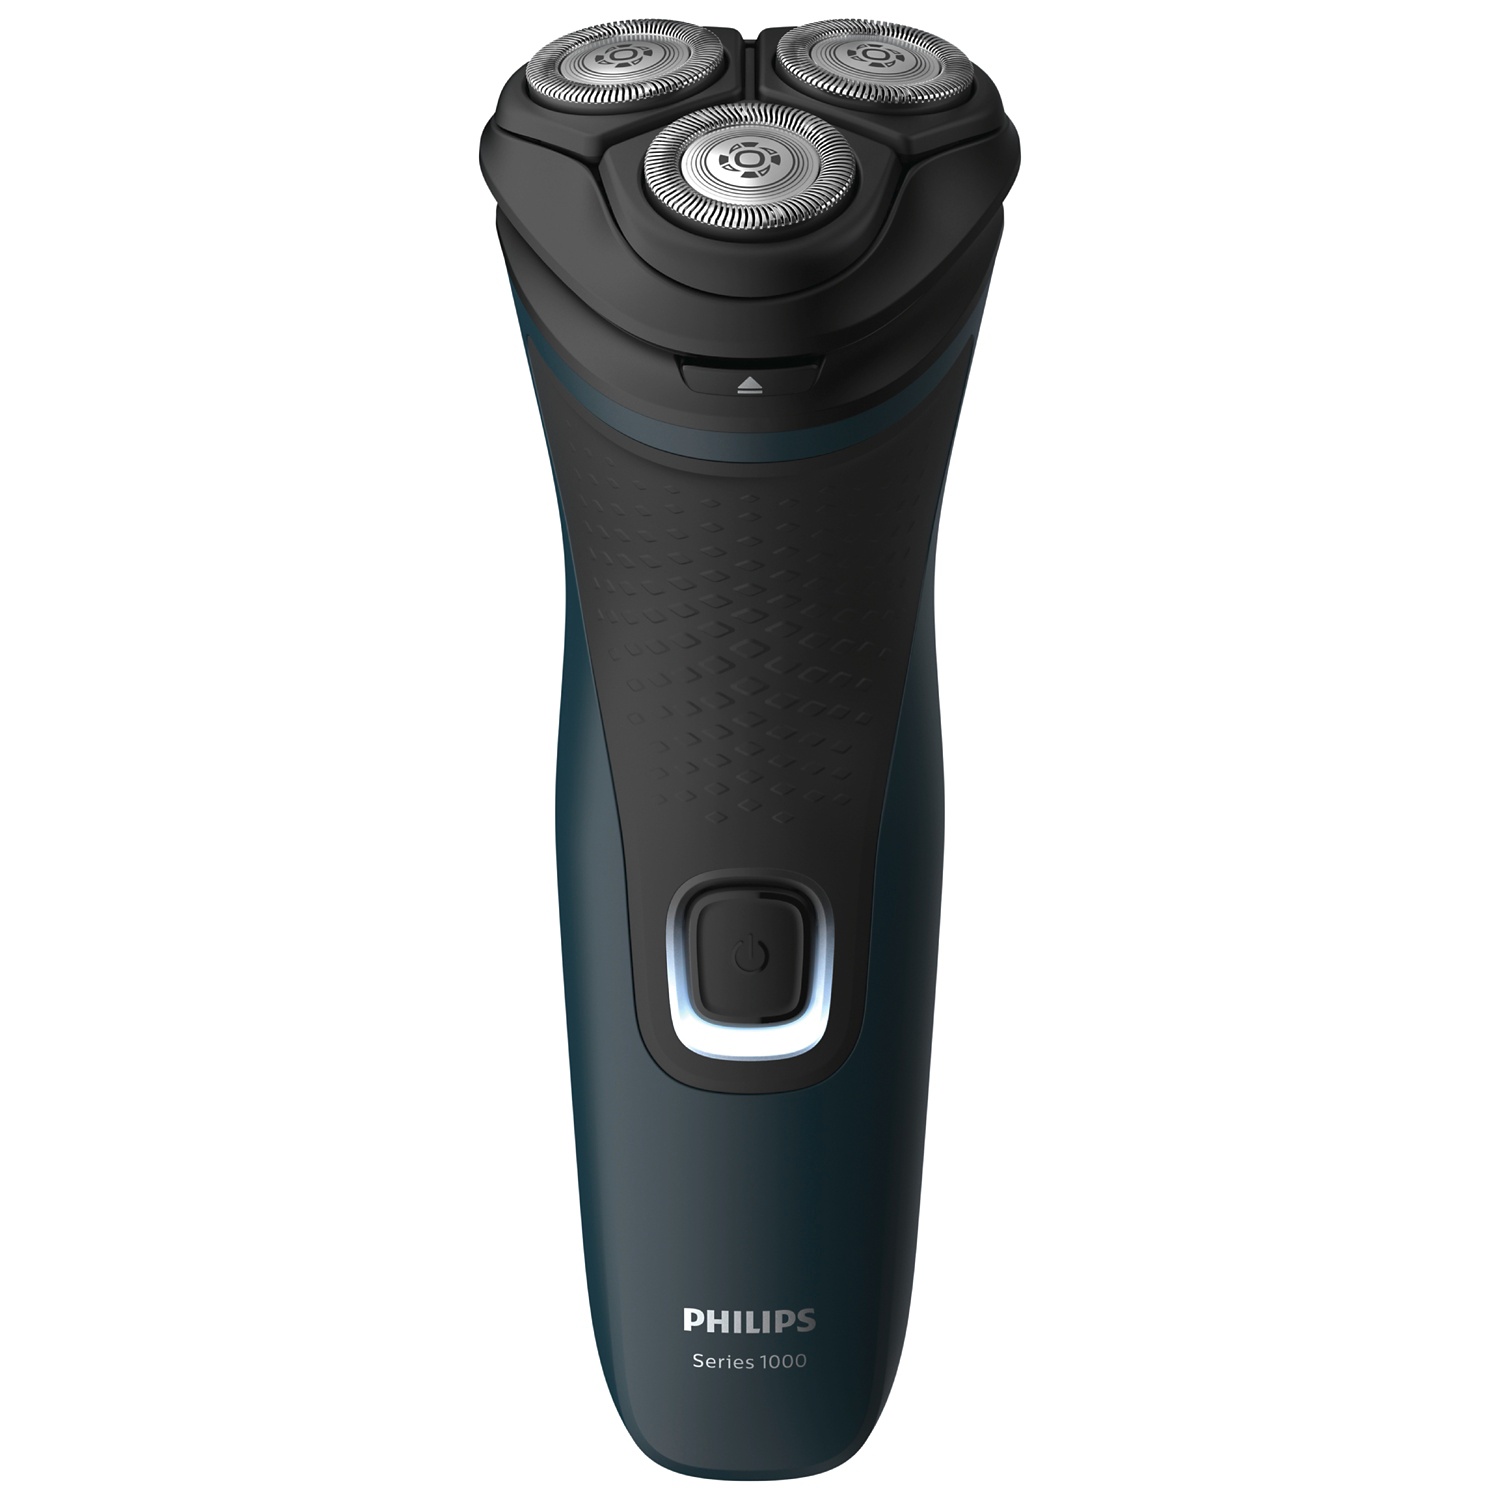 PHILIPS Shaver S1131/41